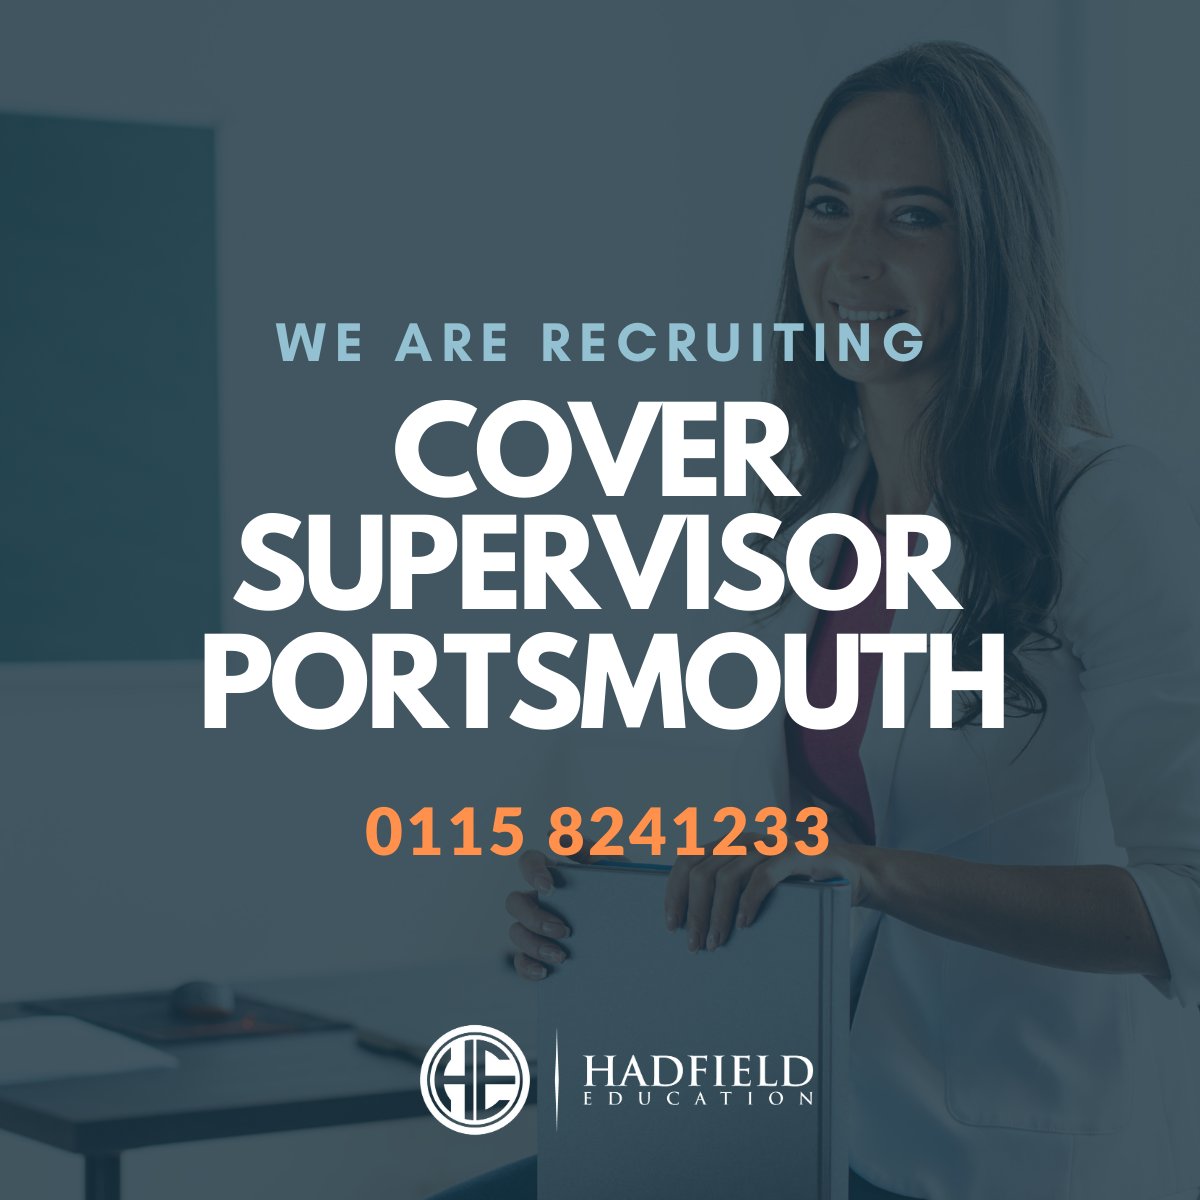 🚀 Join our team! 🚀 We're looking for a Cover Supervisor in 📍Portsmouth 🎓 Apply now and be part of our dynamic team! 💼 #PortsmouthJobs #TeachingJobs #CoverSupervisorJobs 📝 bit.ly/3OS5WYX